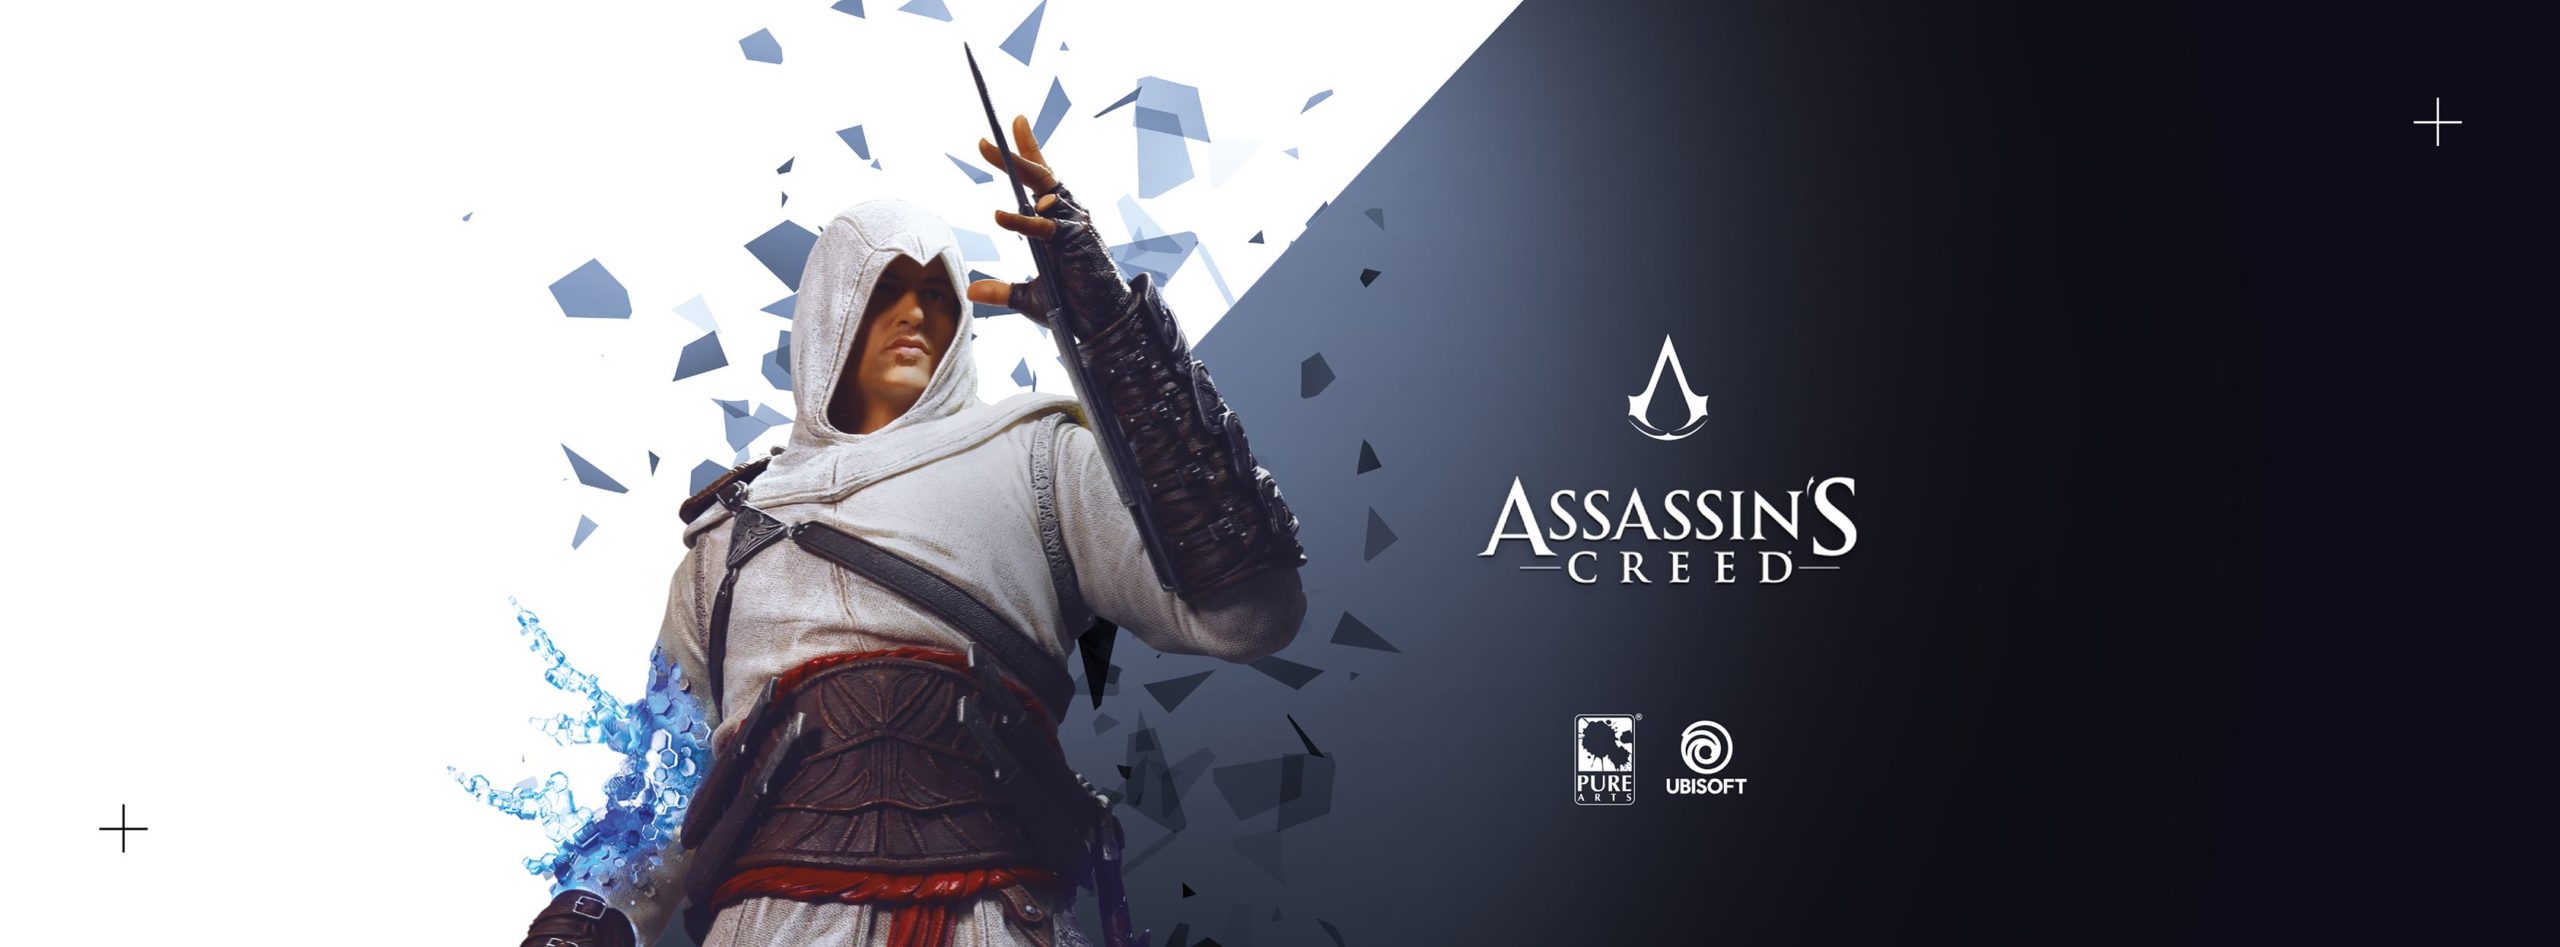  ASSASSIN’S CREED: ANIMUS ALTAIR